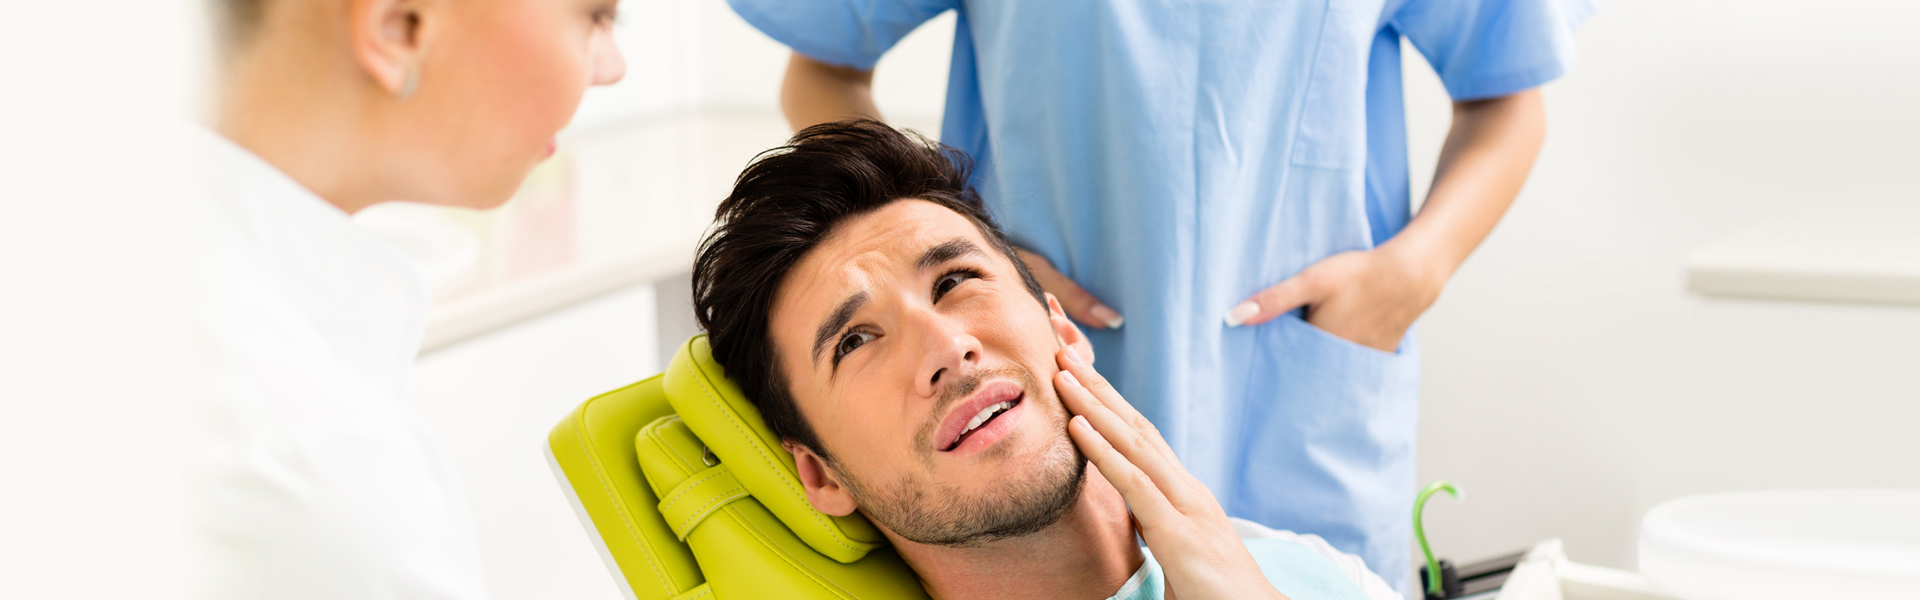 Dental Emergencies: What They Are and How to Handle Them